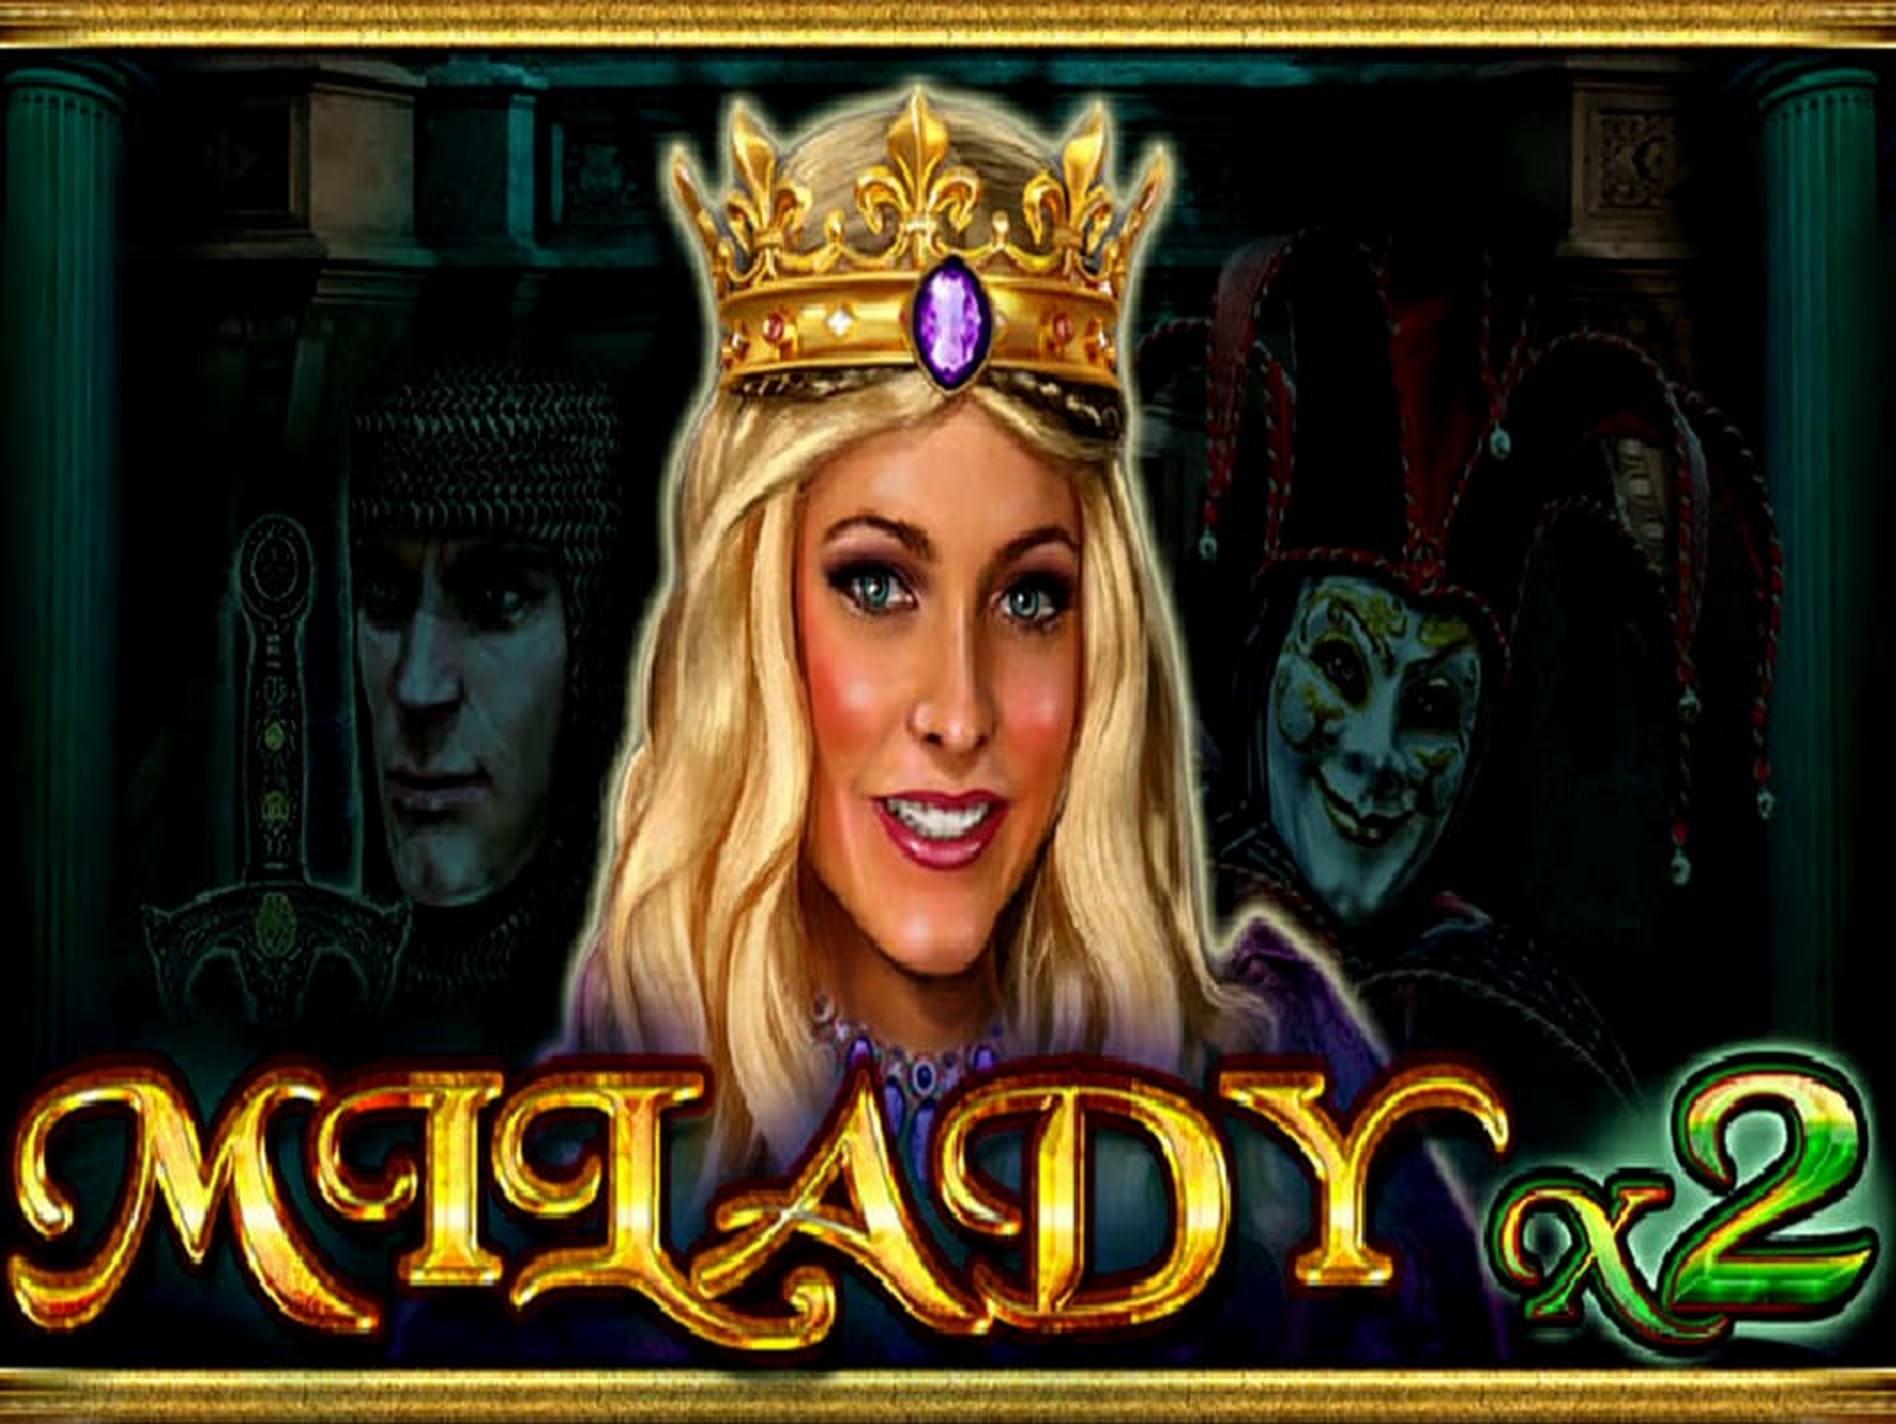 The Milady X2 Online Slot Demo Game by casino technology